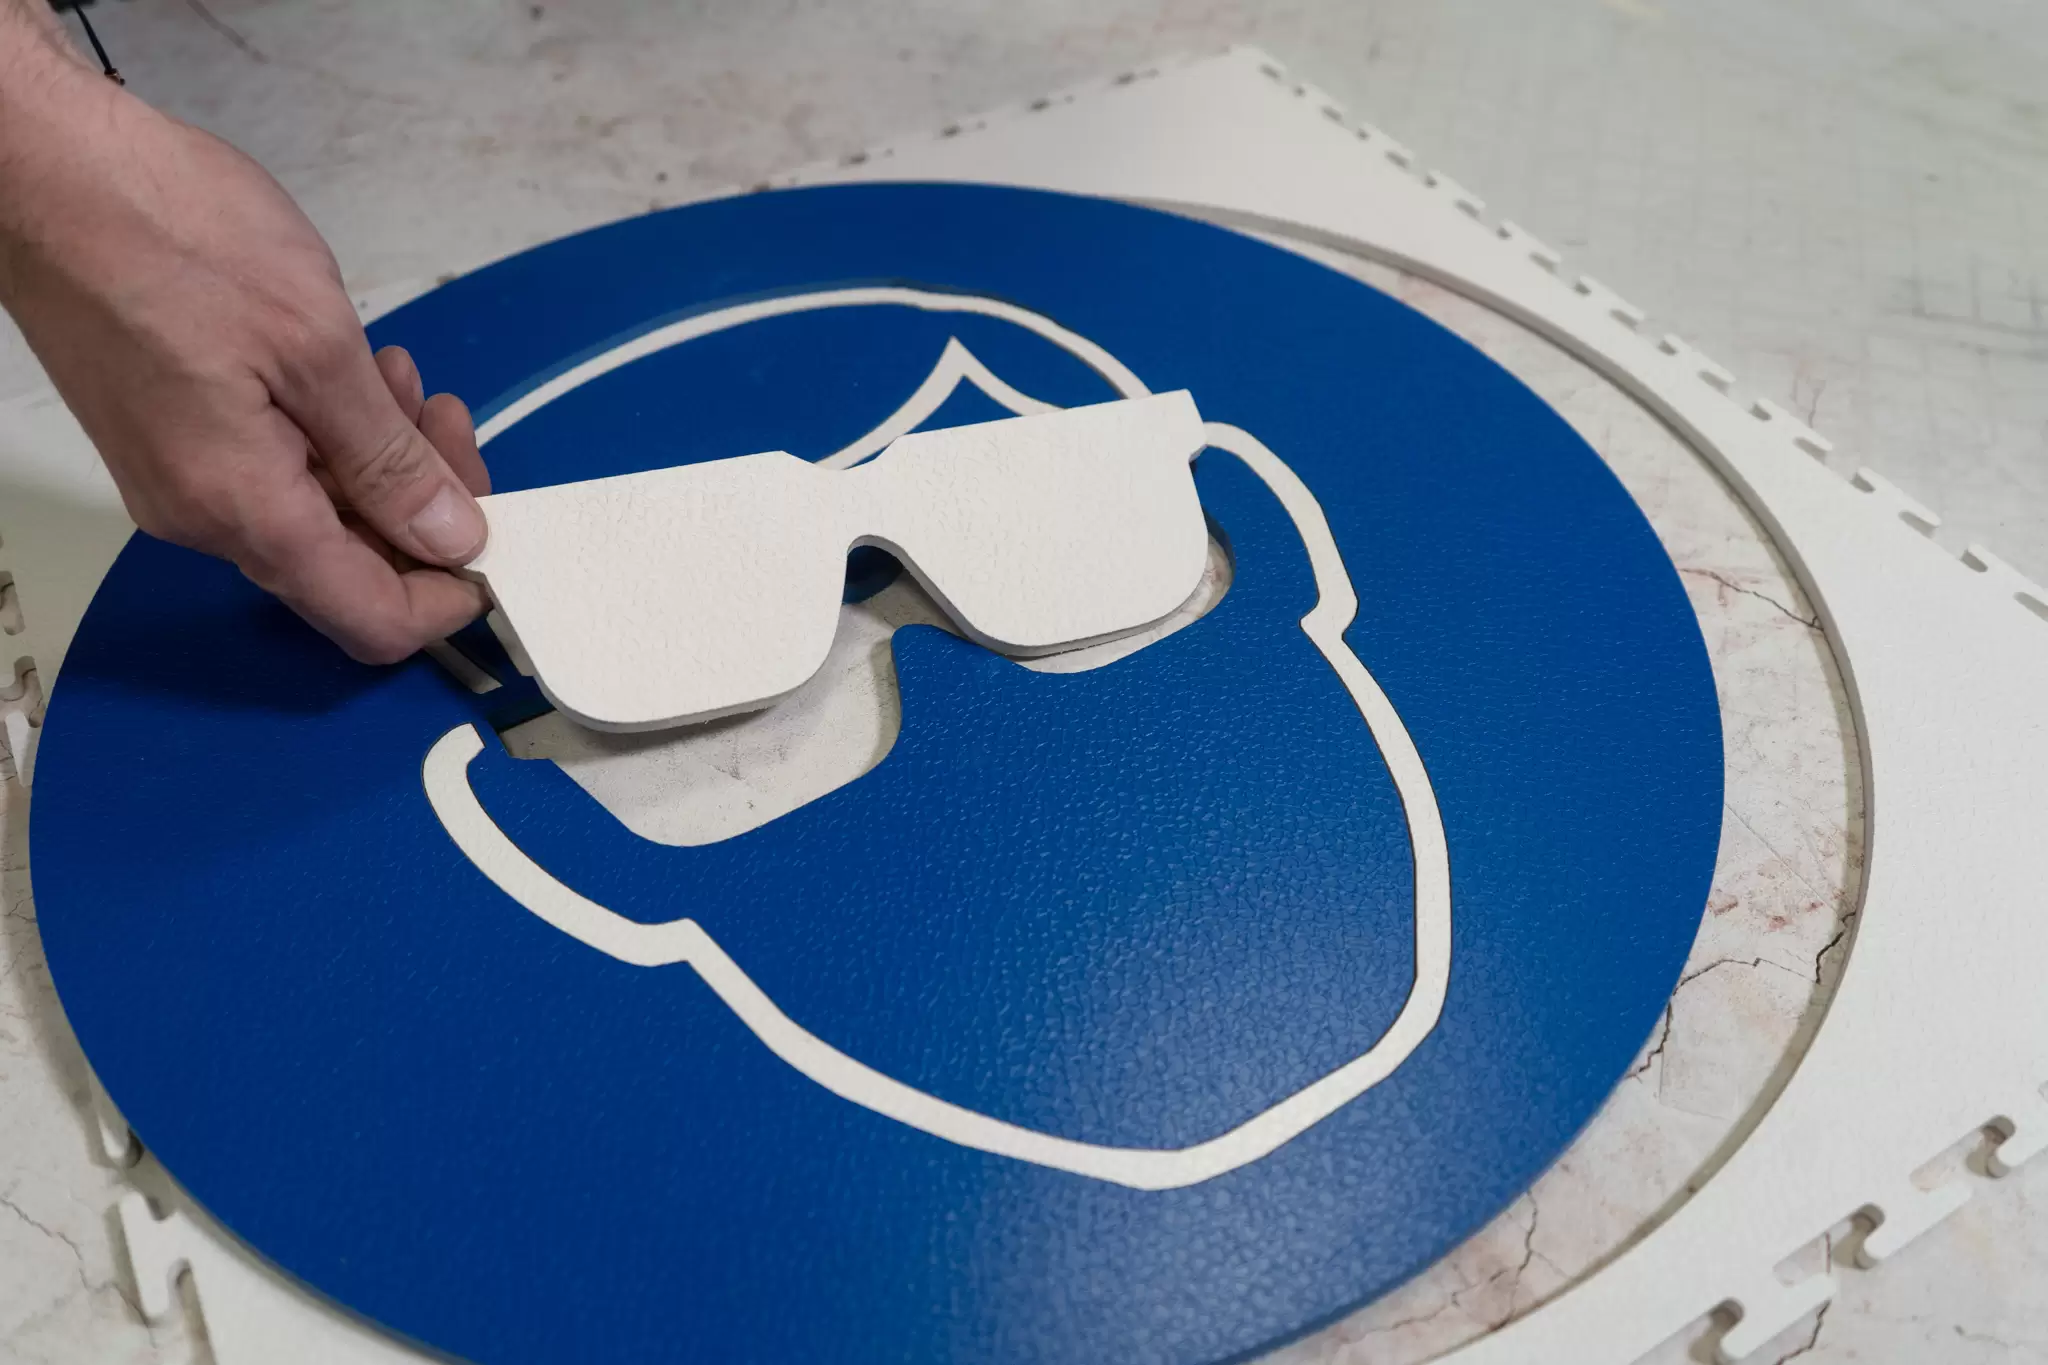 Ecotile floor signs are created from original Ecotiles, using water jet cutting to create the logo or sign design